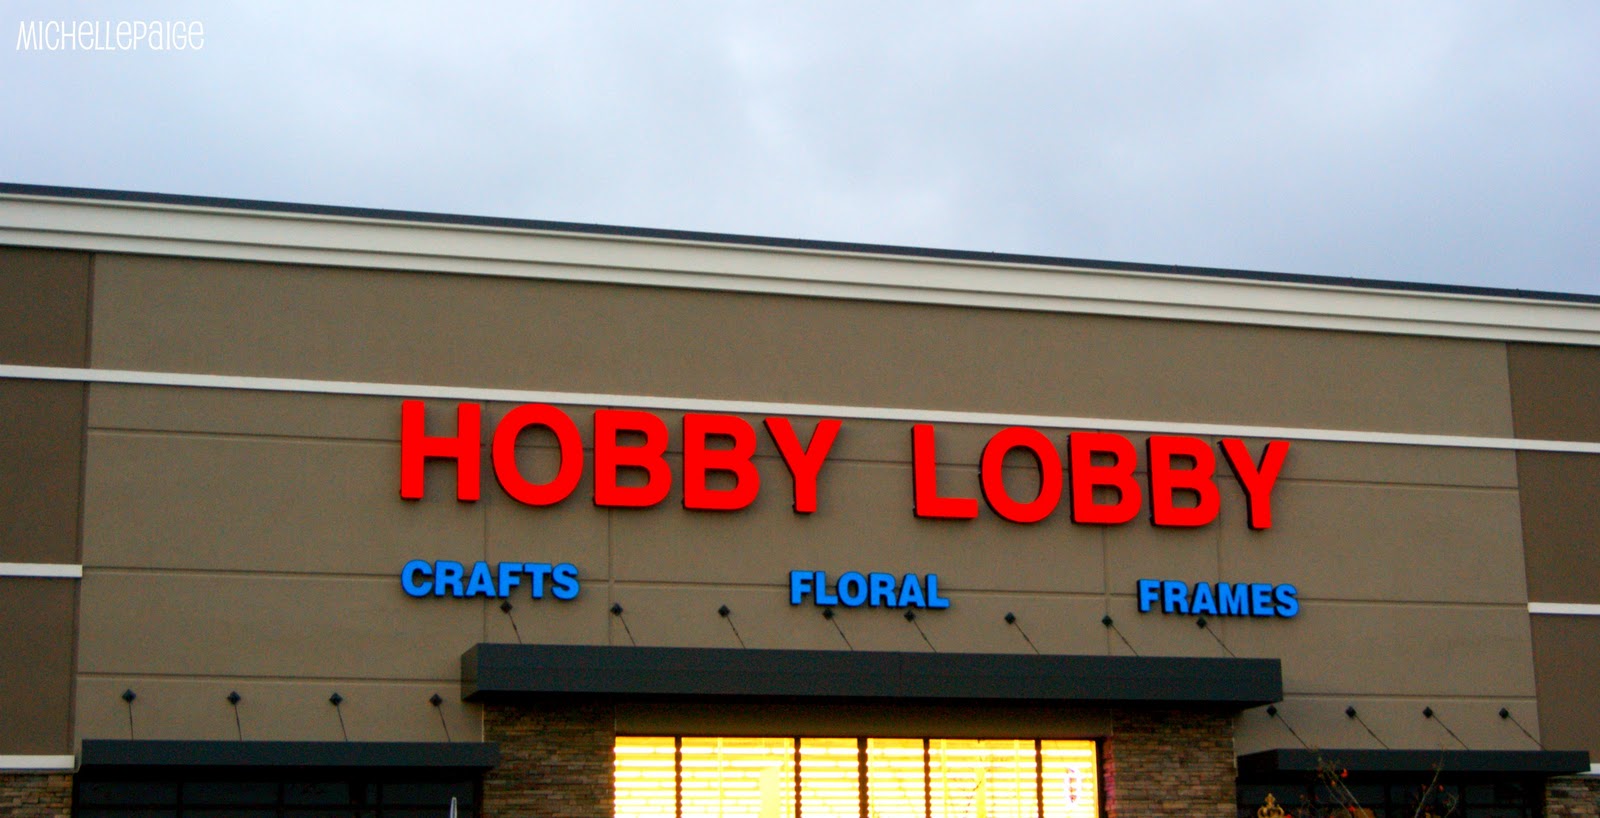 michelle paige blogs: Birthday Trip to Hobby Lobby